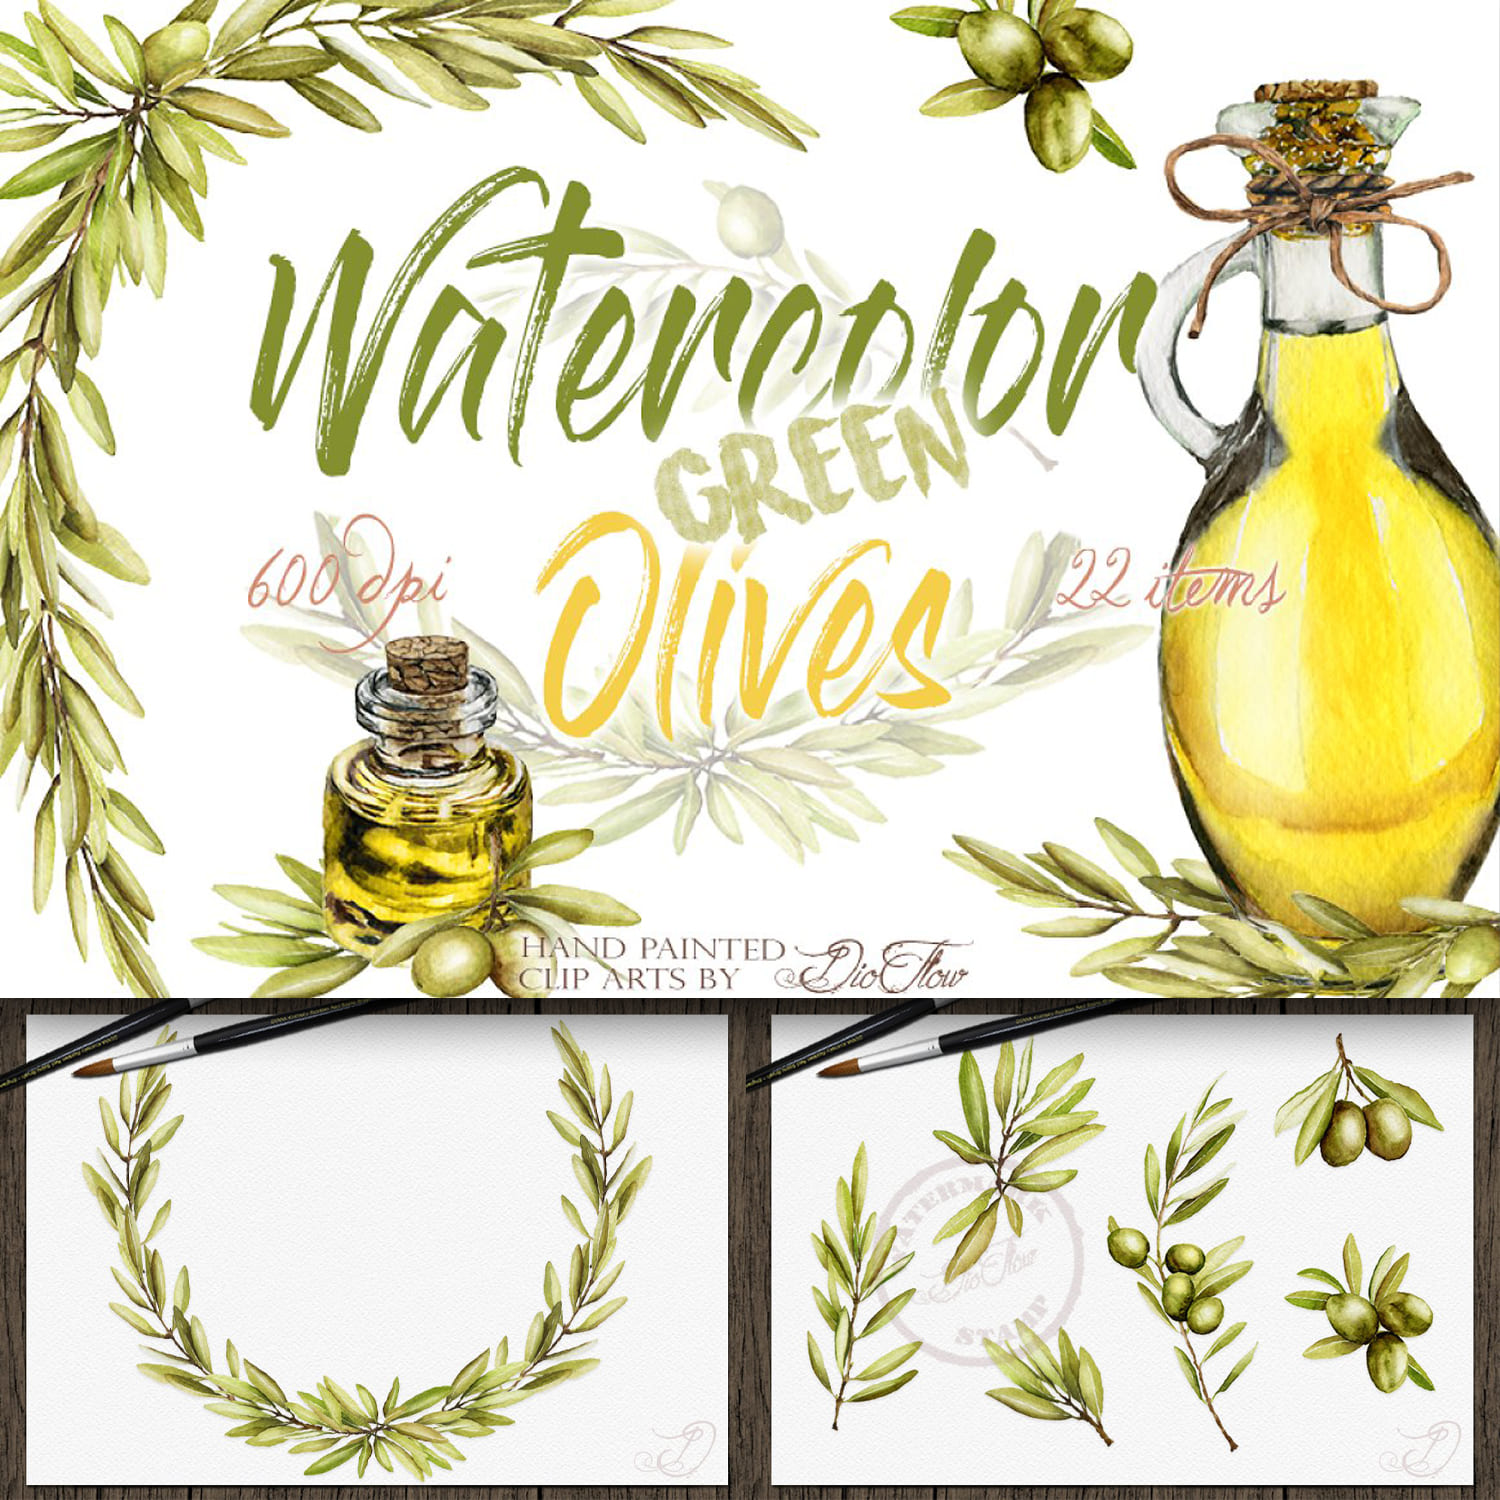 Green Olive Watercolor Clip Art cover.